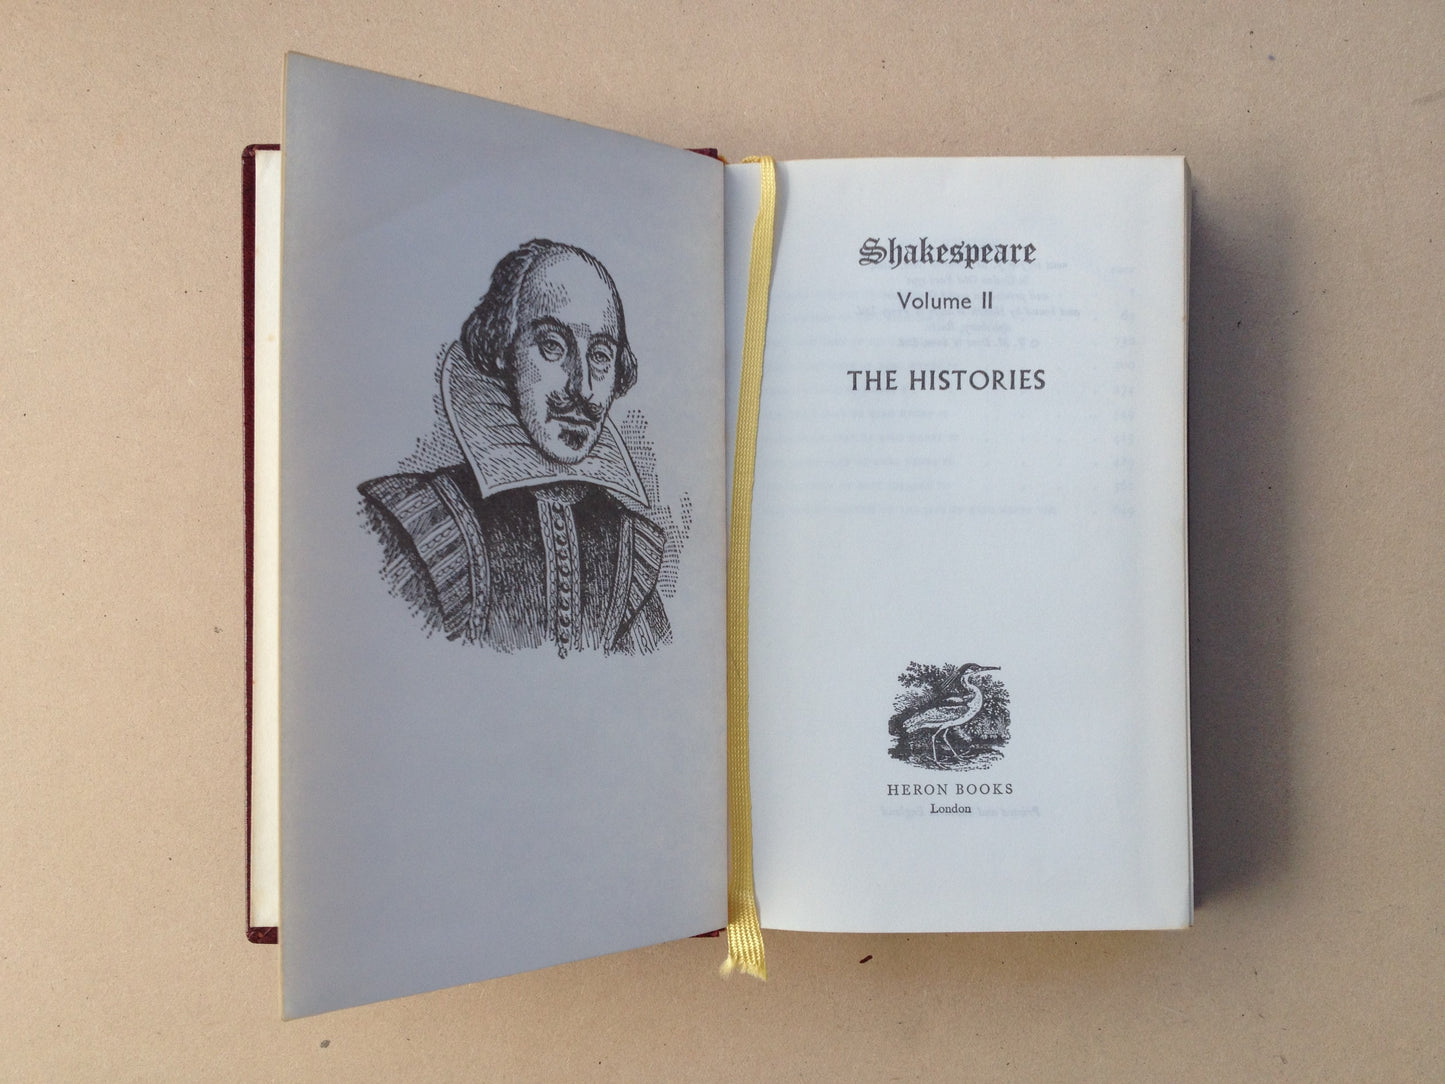 Shakespeare The Complete Works Volume II The Histories by Heron Books London